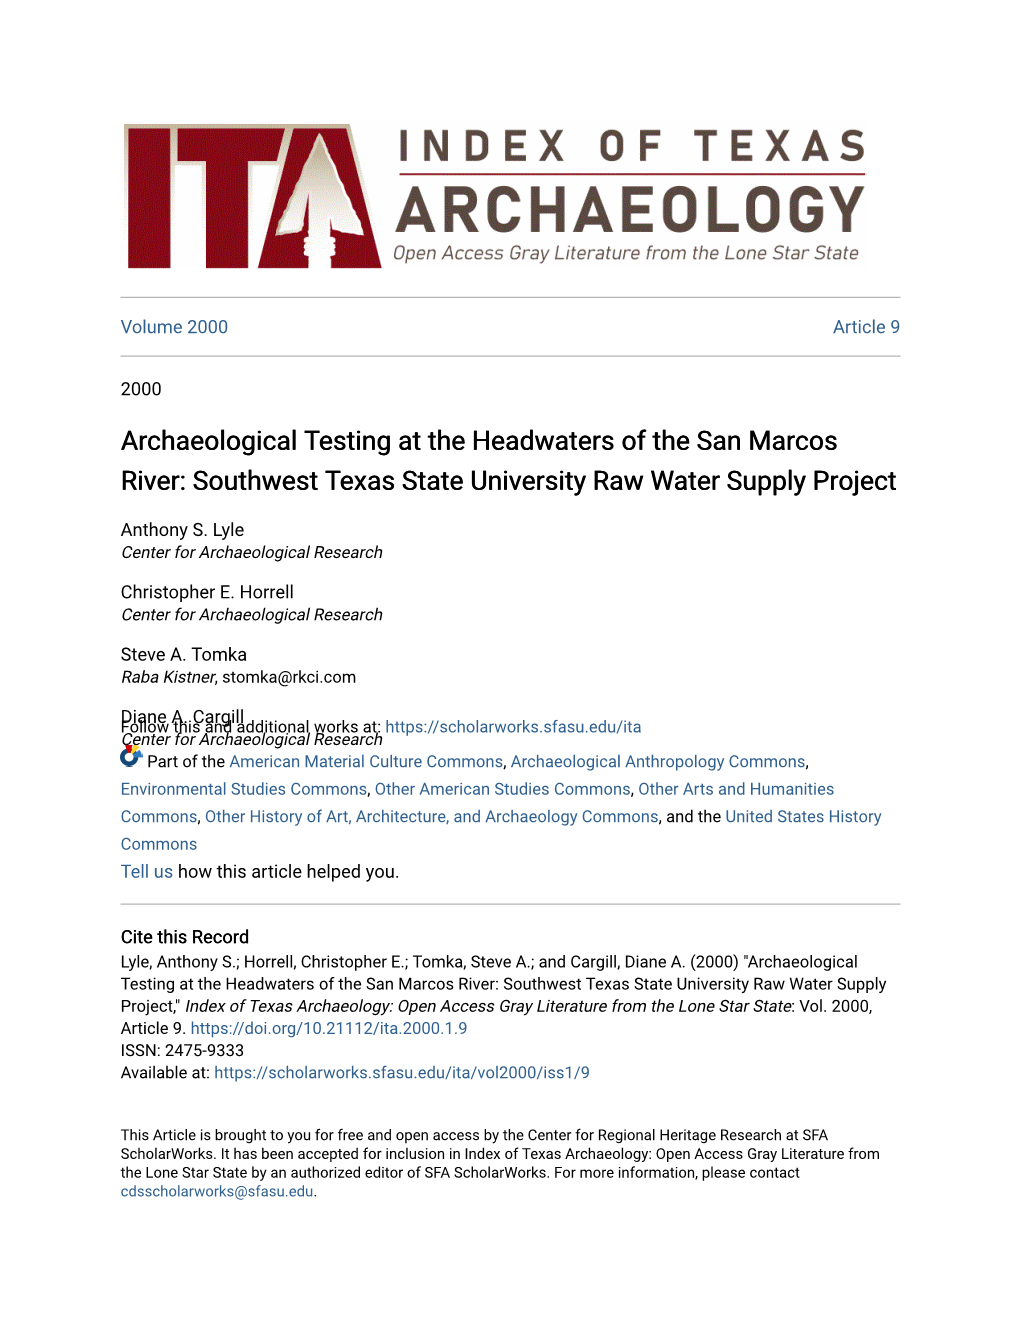 Archaeological Testing at the Headwaters of the San Marcos River: Southwest Texas State University Raw Water Supply Project